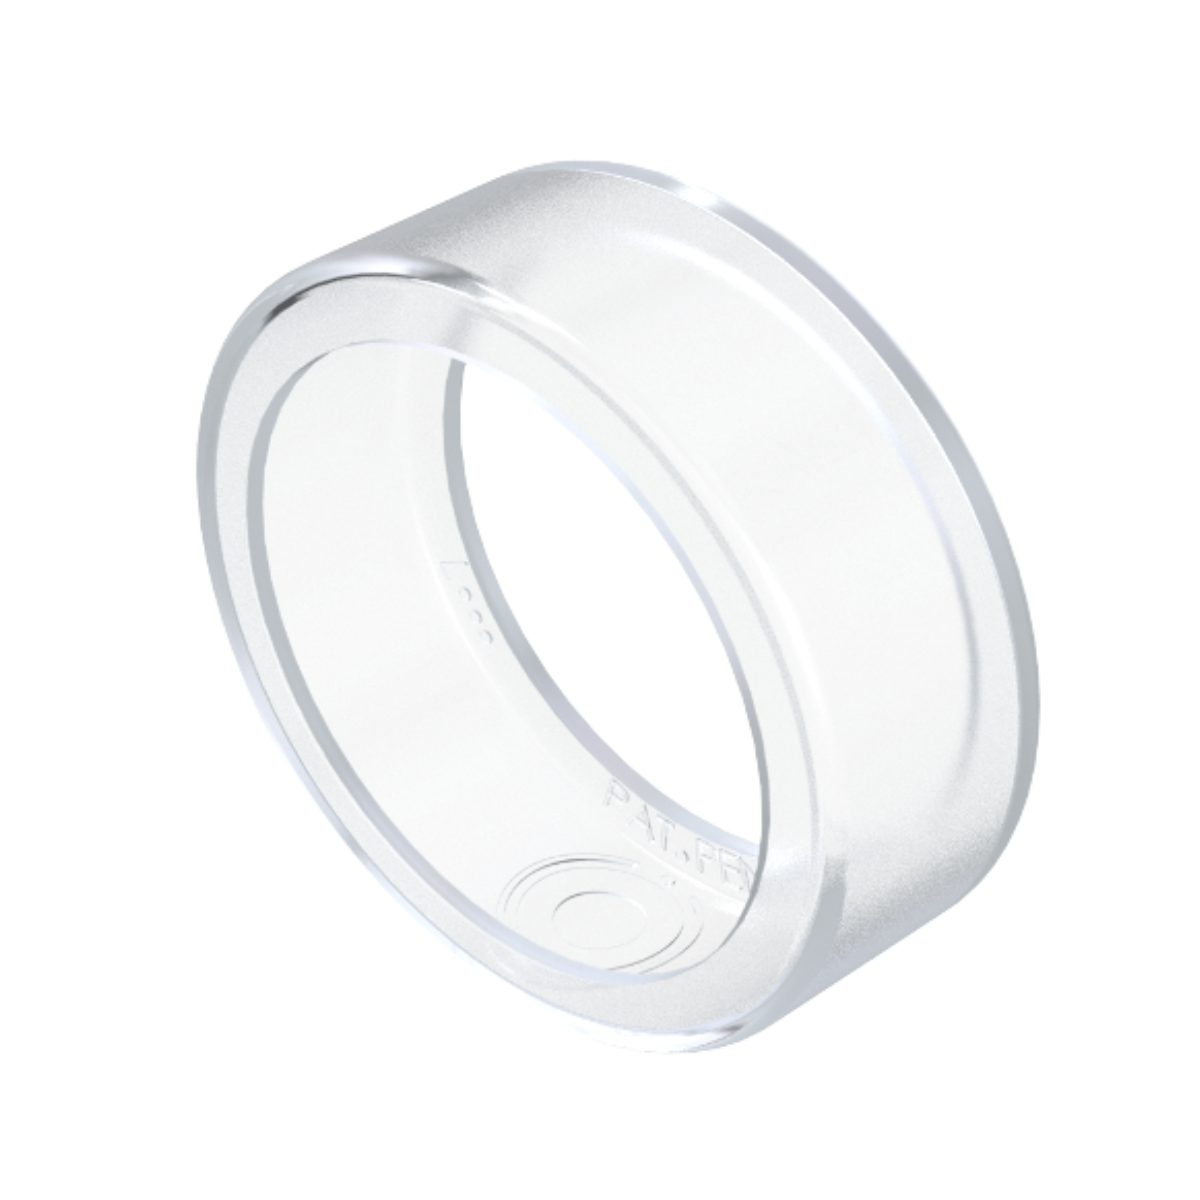 Ring Protector (Now Available!)